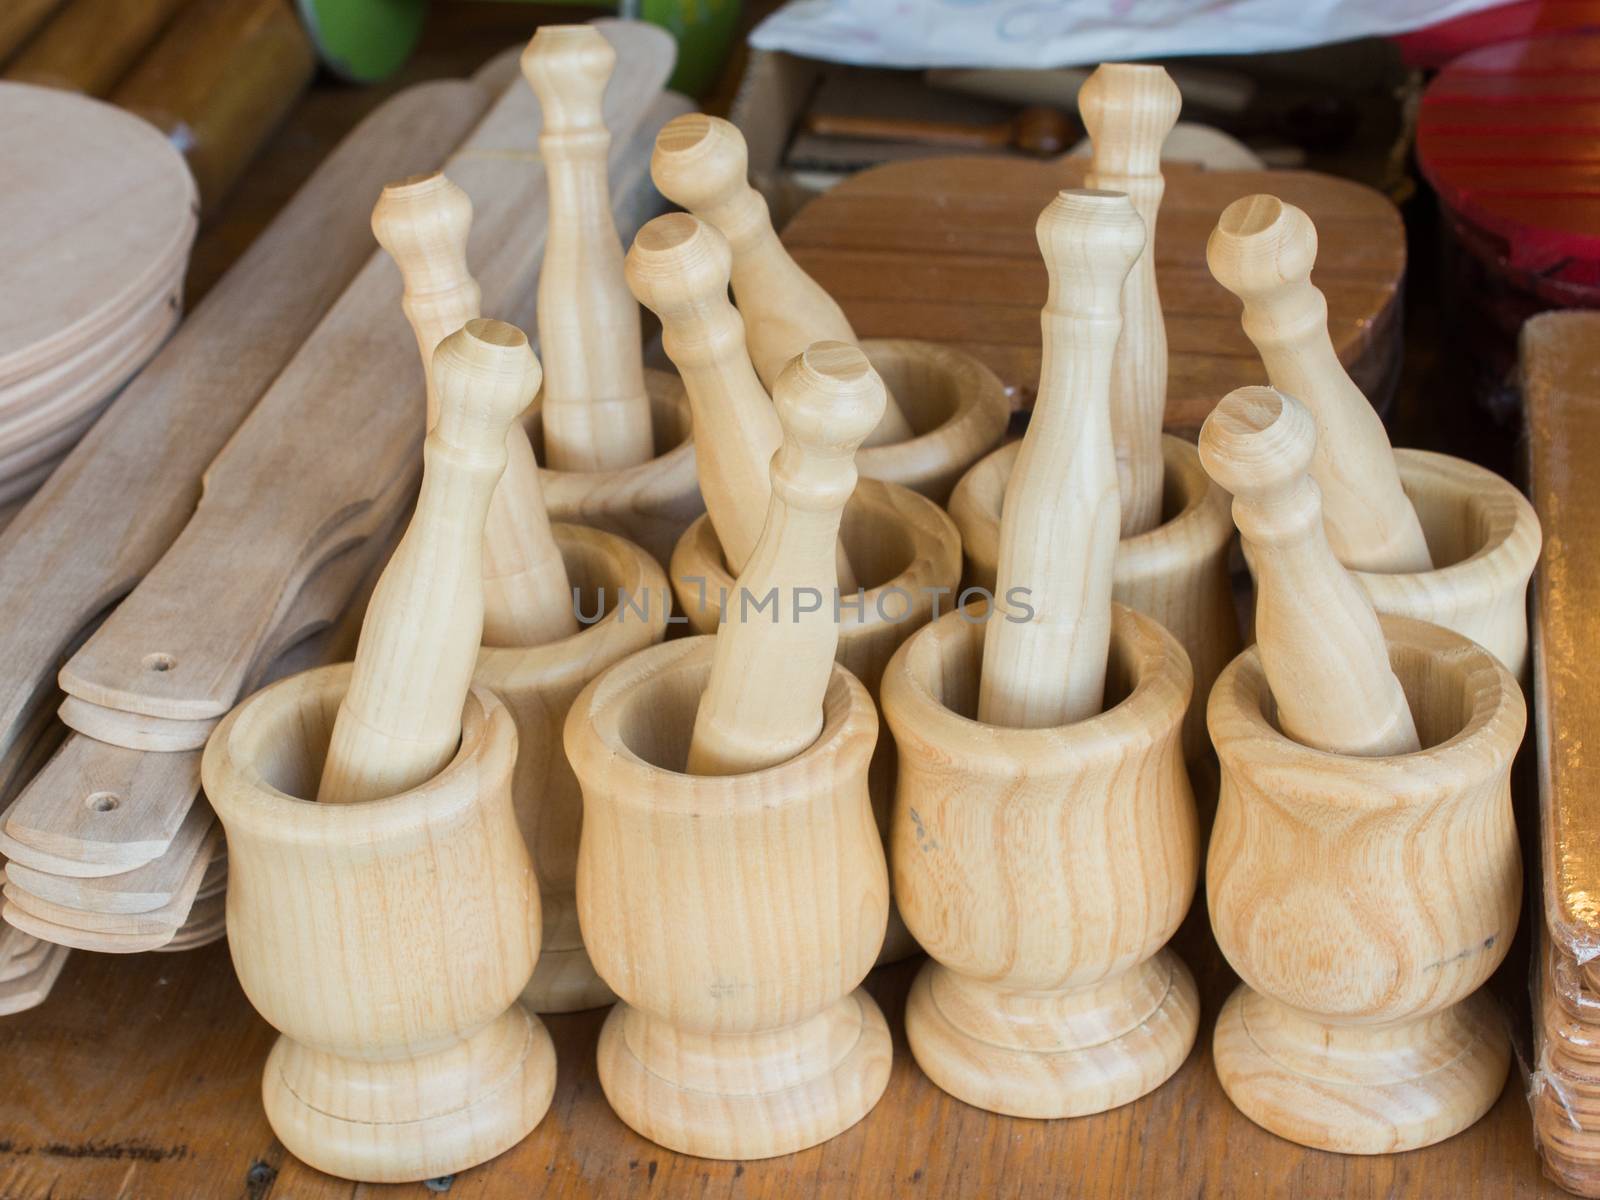 wooden mortars and pestles as a kitchenware by berkay